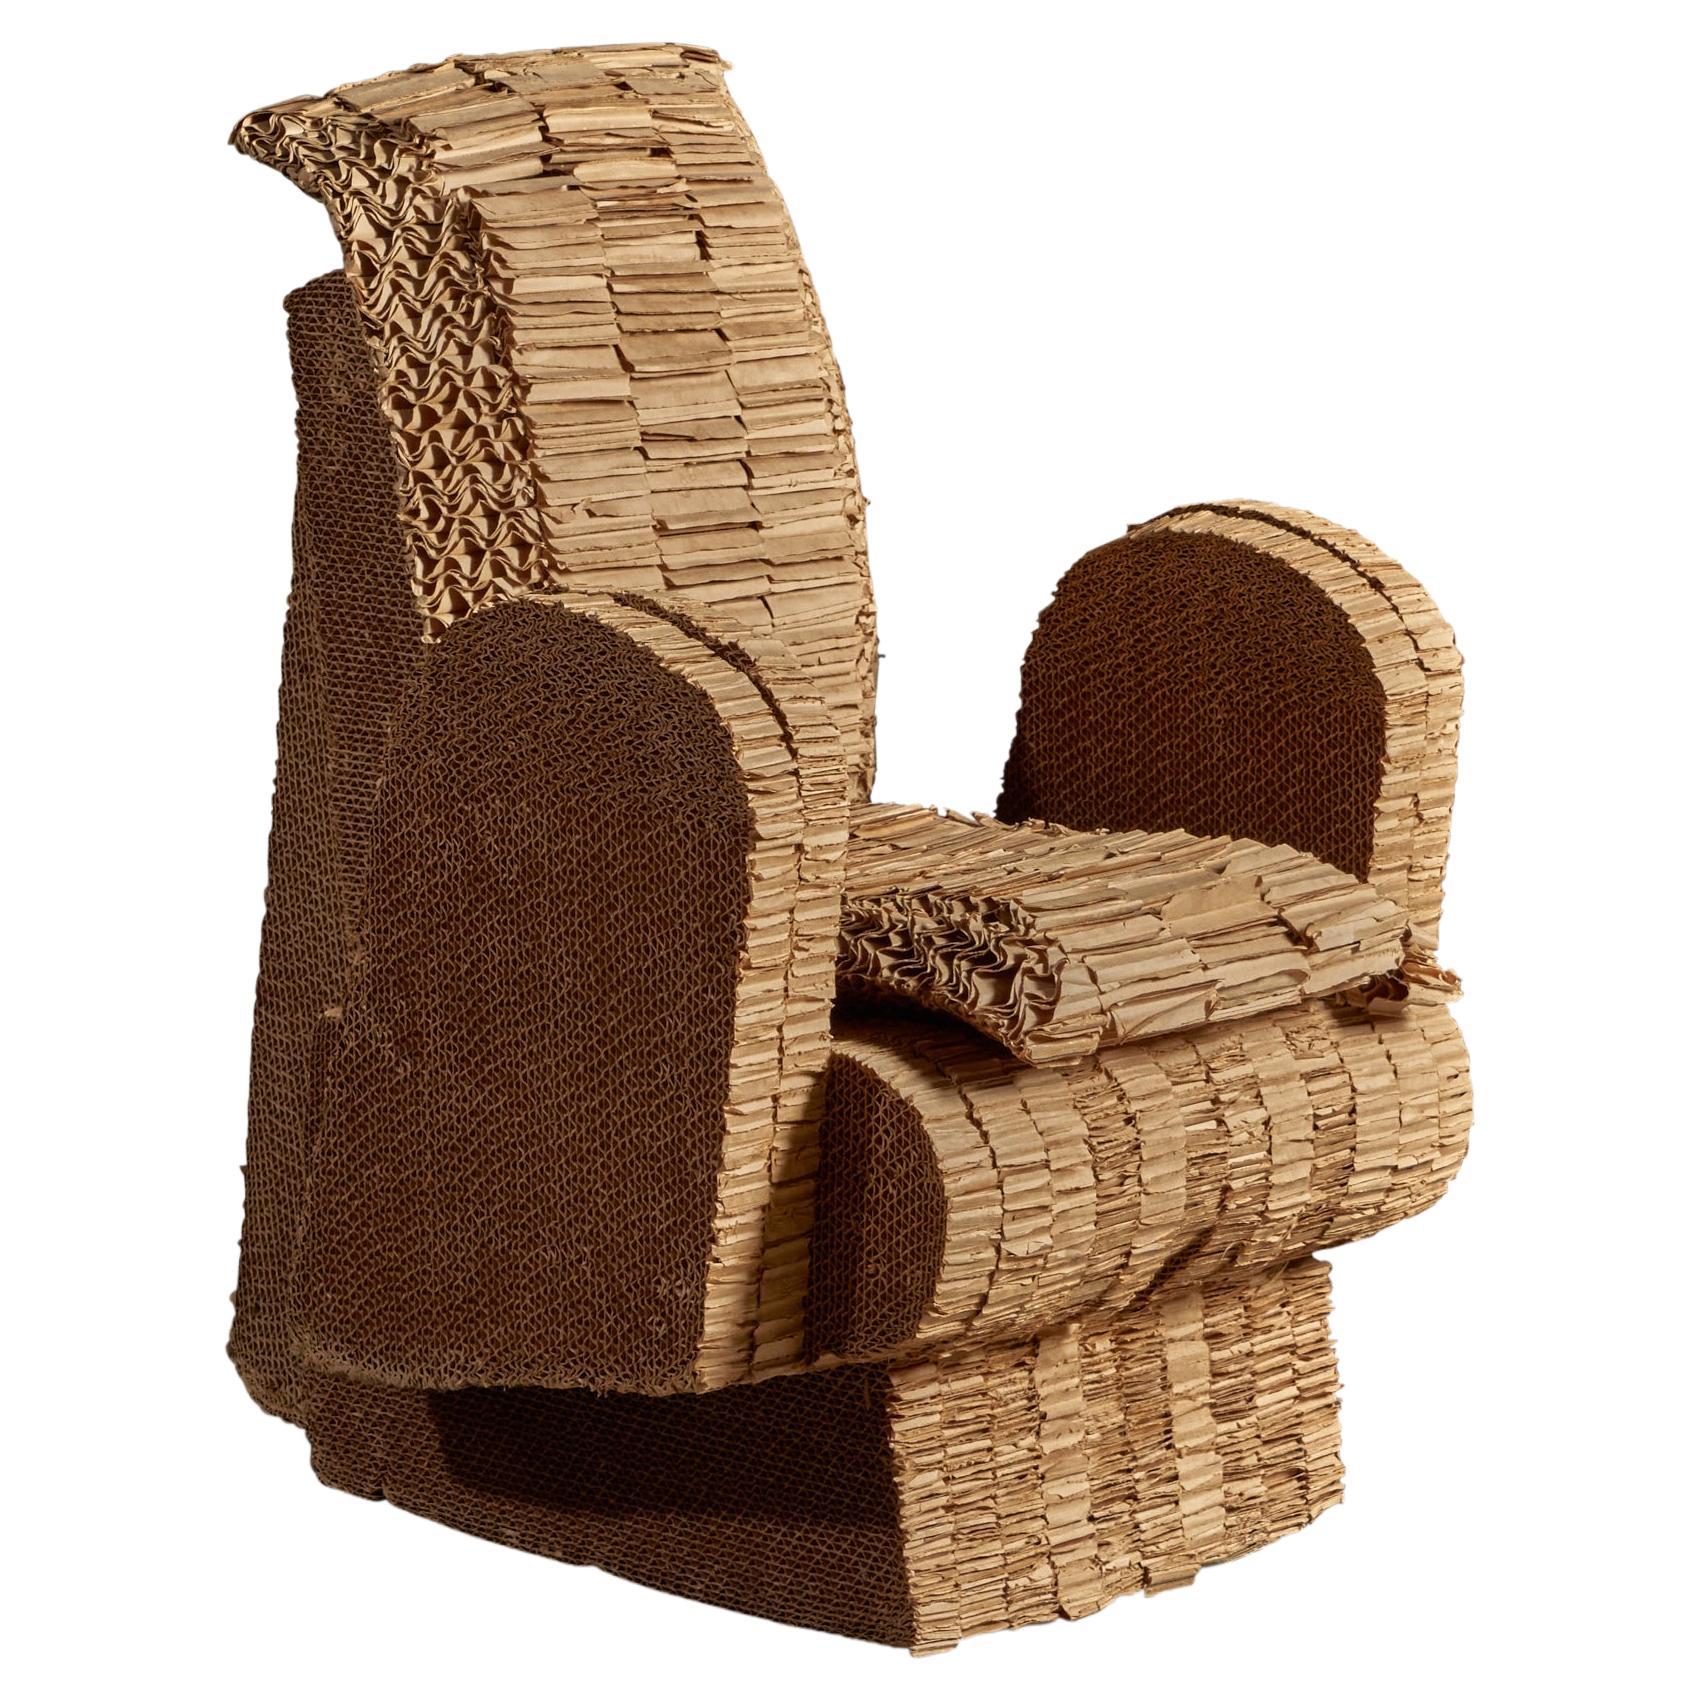 Frank Gehry, "Skinny Beaver" Lounge Chair, laminated cardboard, USA, 1987 For Sale